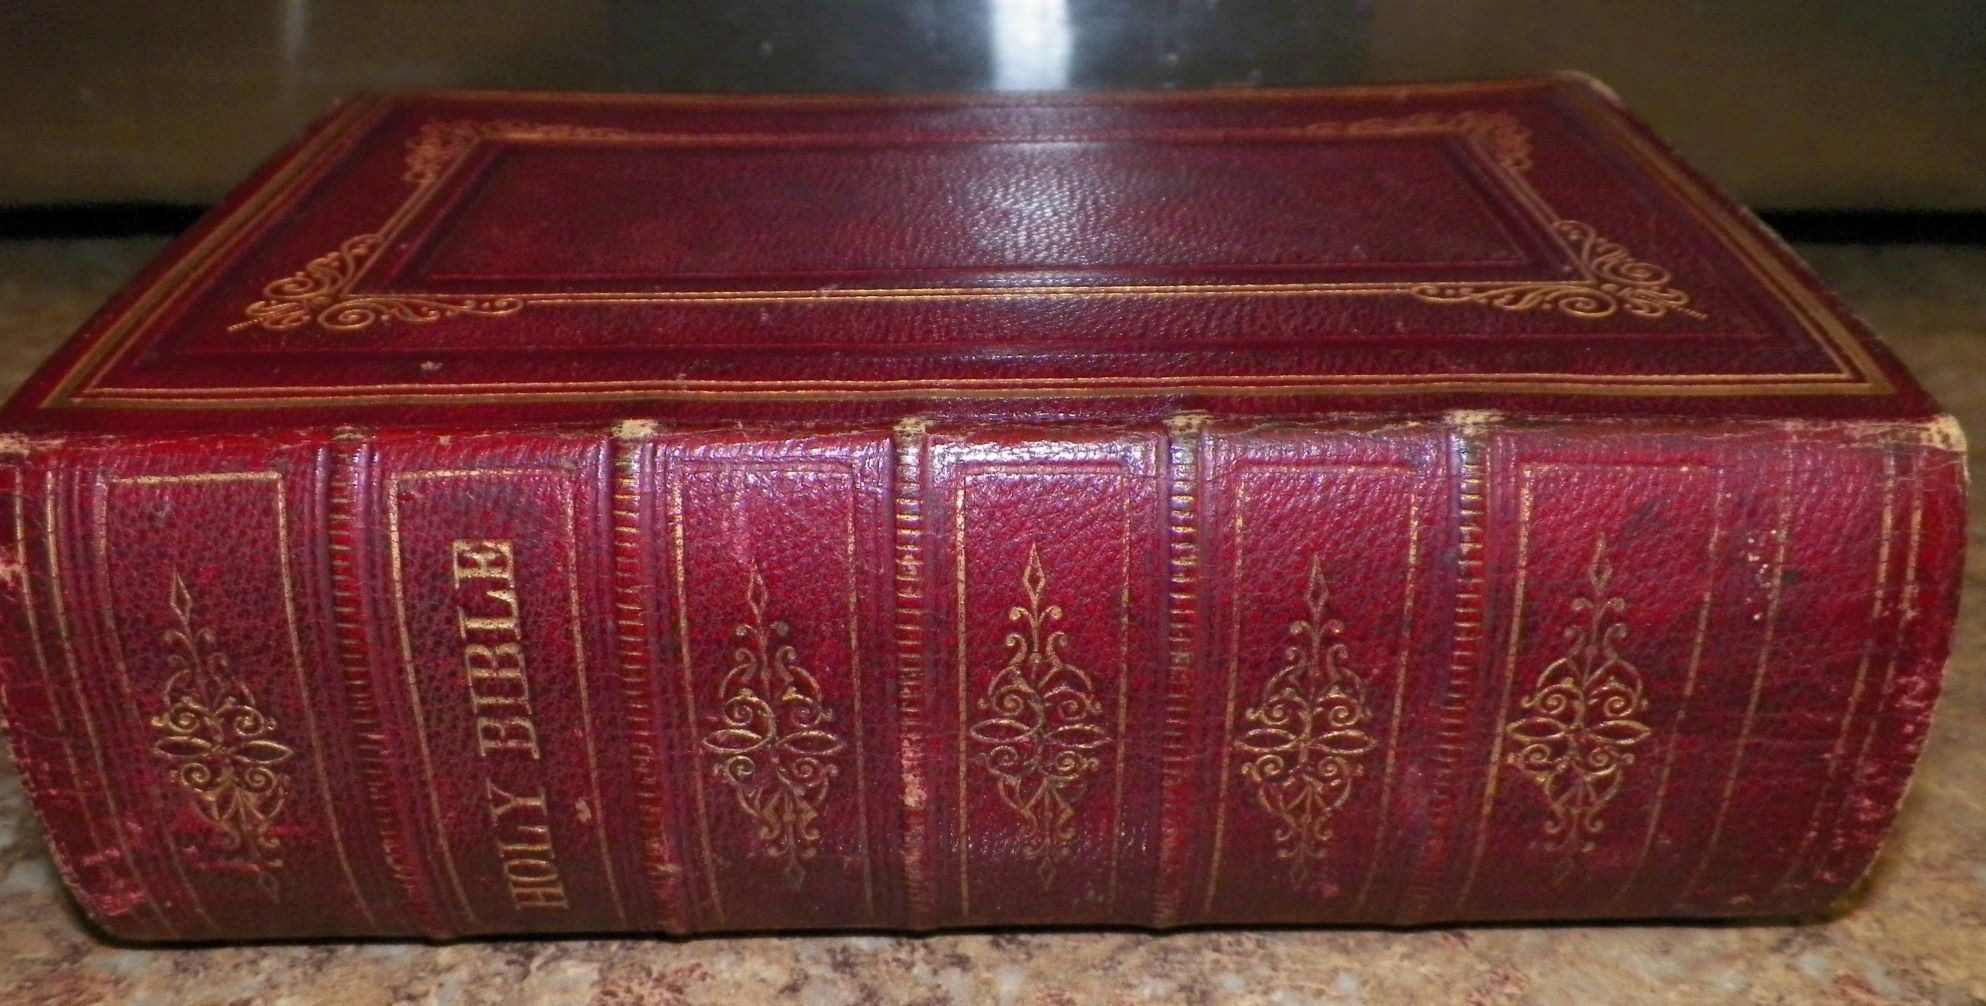 COLLECTIBLE BOOK BIBLES & TORAHS BIBLE BIG RED LEATHER COVER 2A_AA.jpg